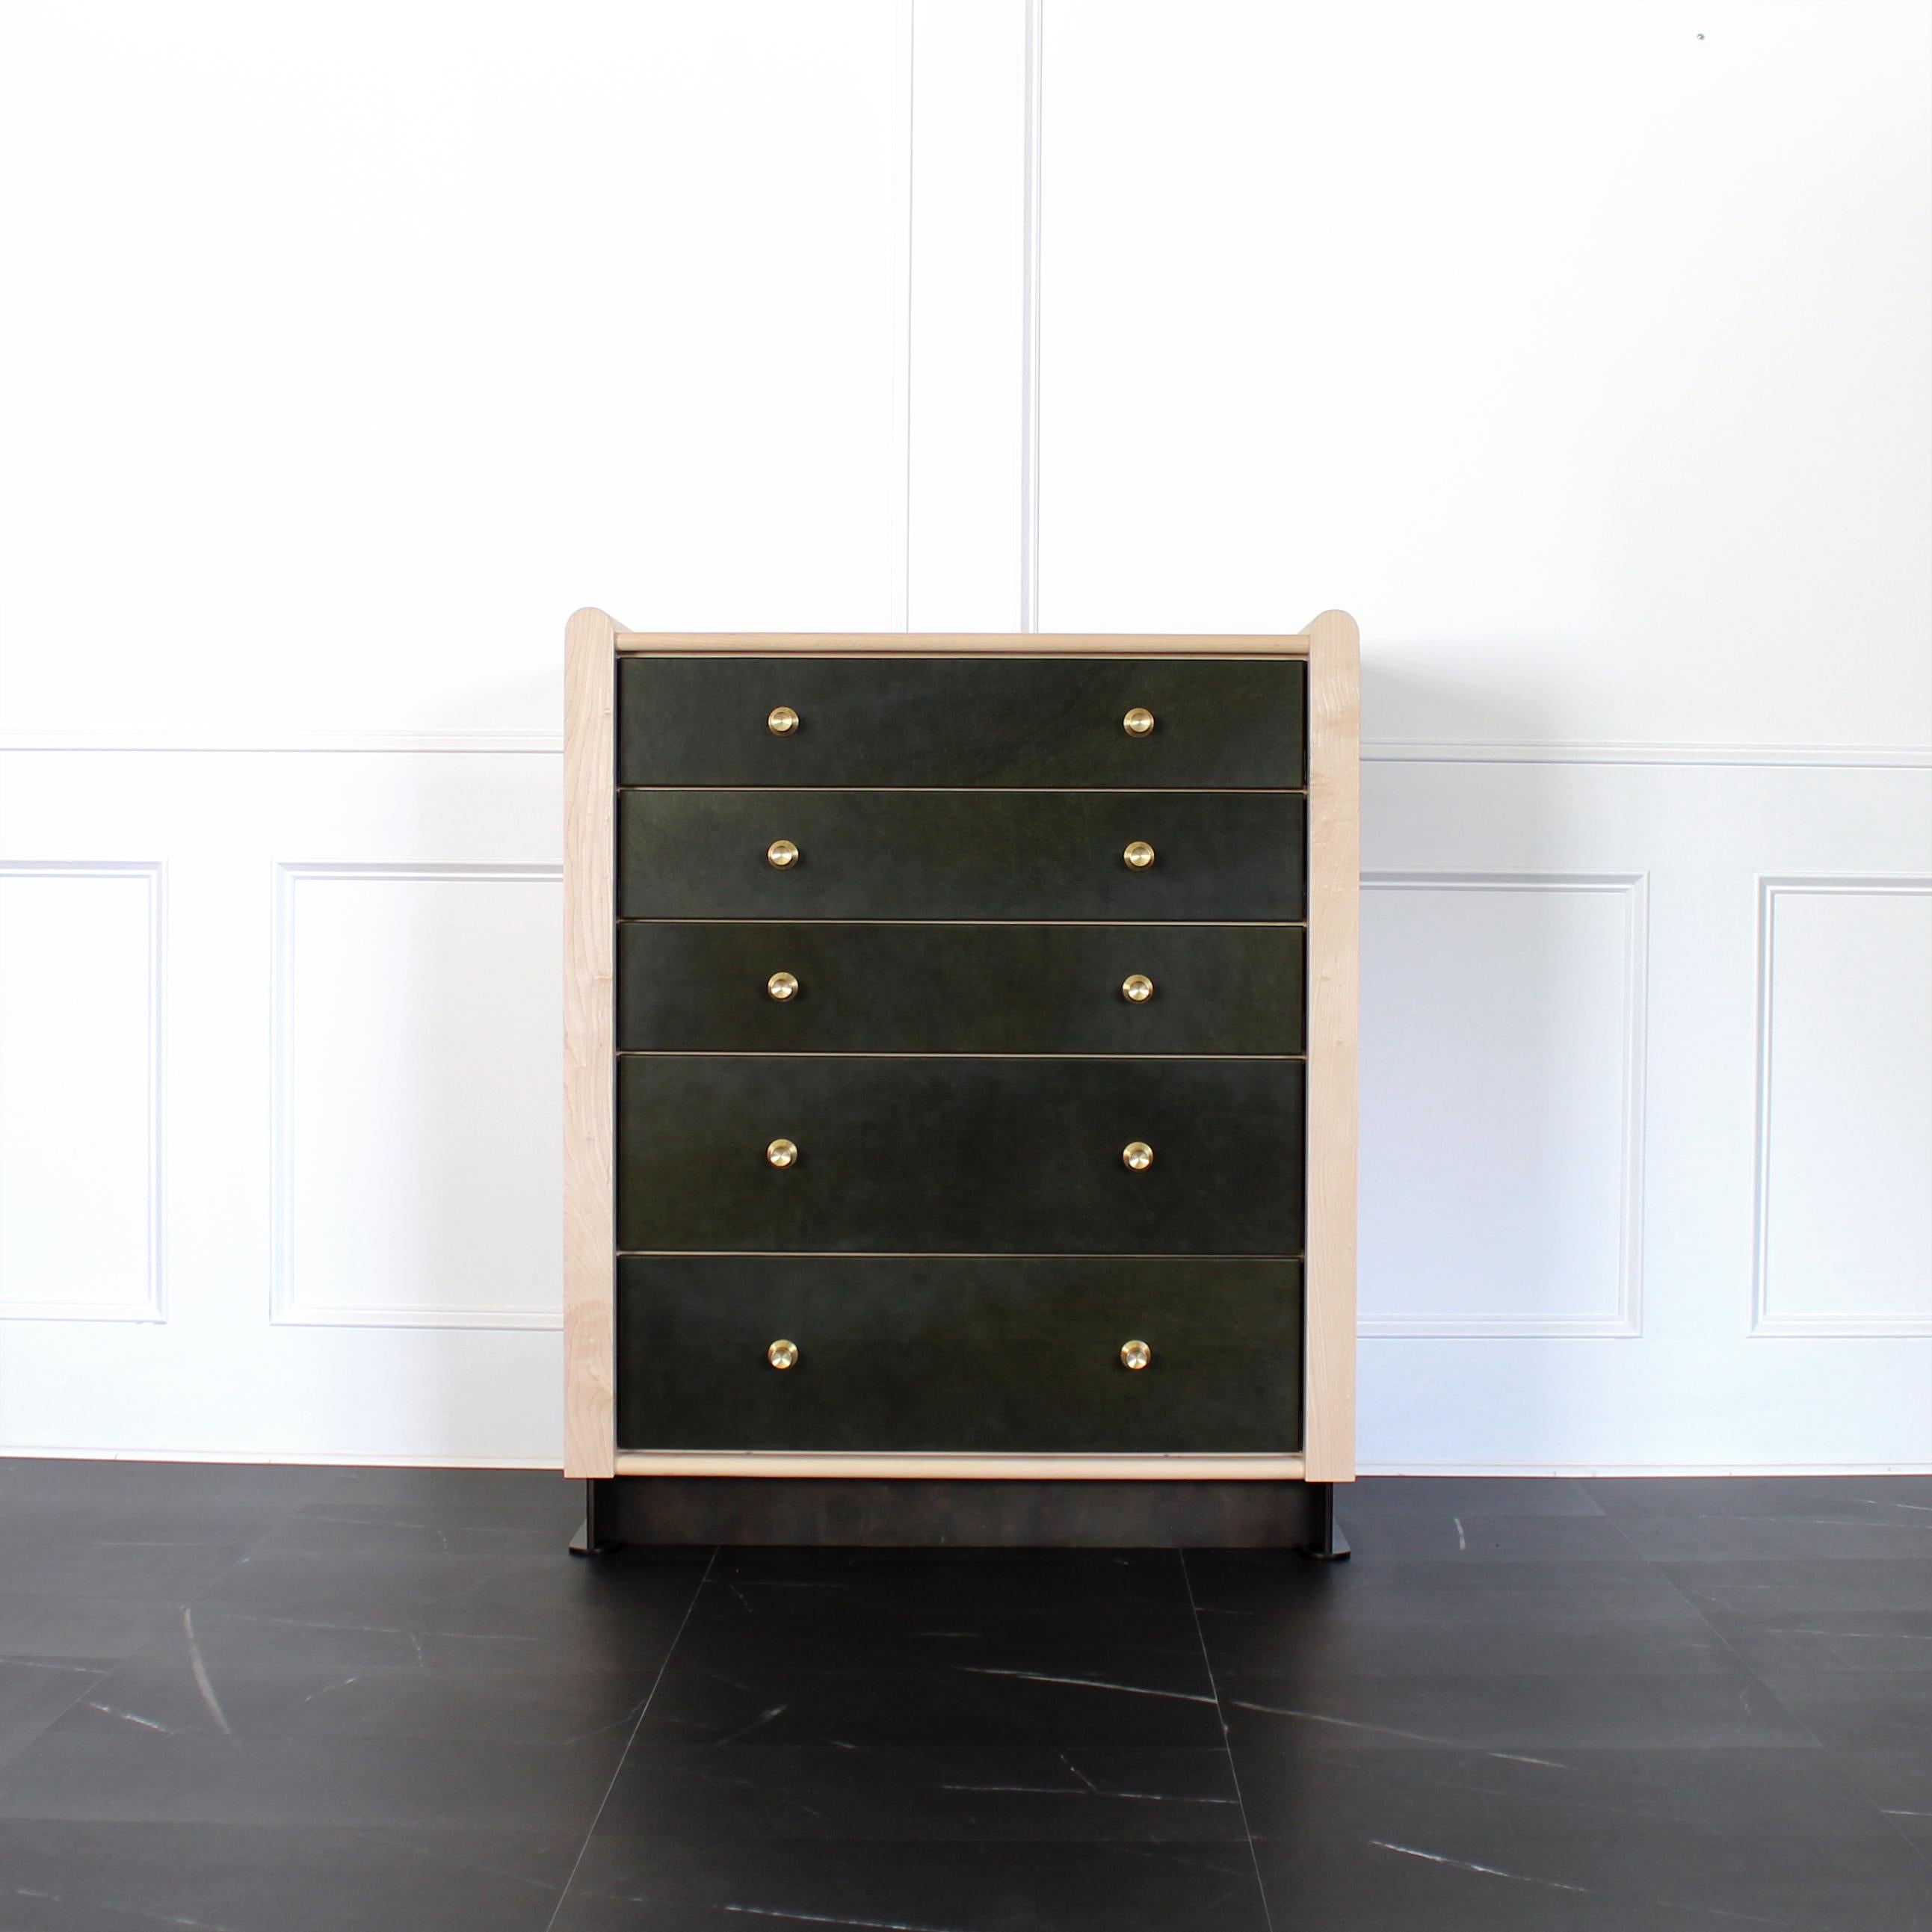 Alton Highboy by Crump and Kwash 

Features a solid wood case / oiled or acrylic finish / leather wrapped drawer fronts  / premium, full extension, soft close drawer slides / solid maple, dovetailed drawer boxes / solid brass pulls / patinated steel